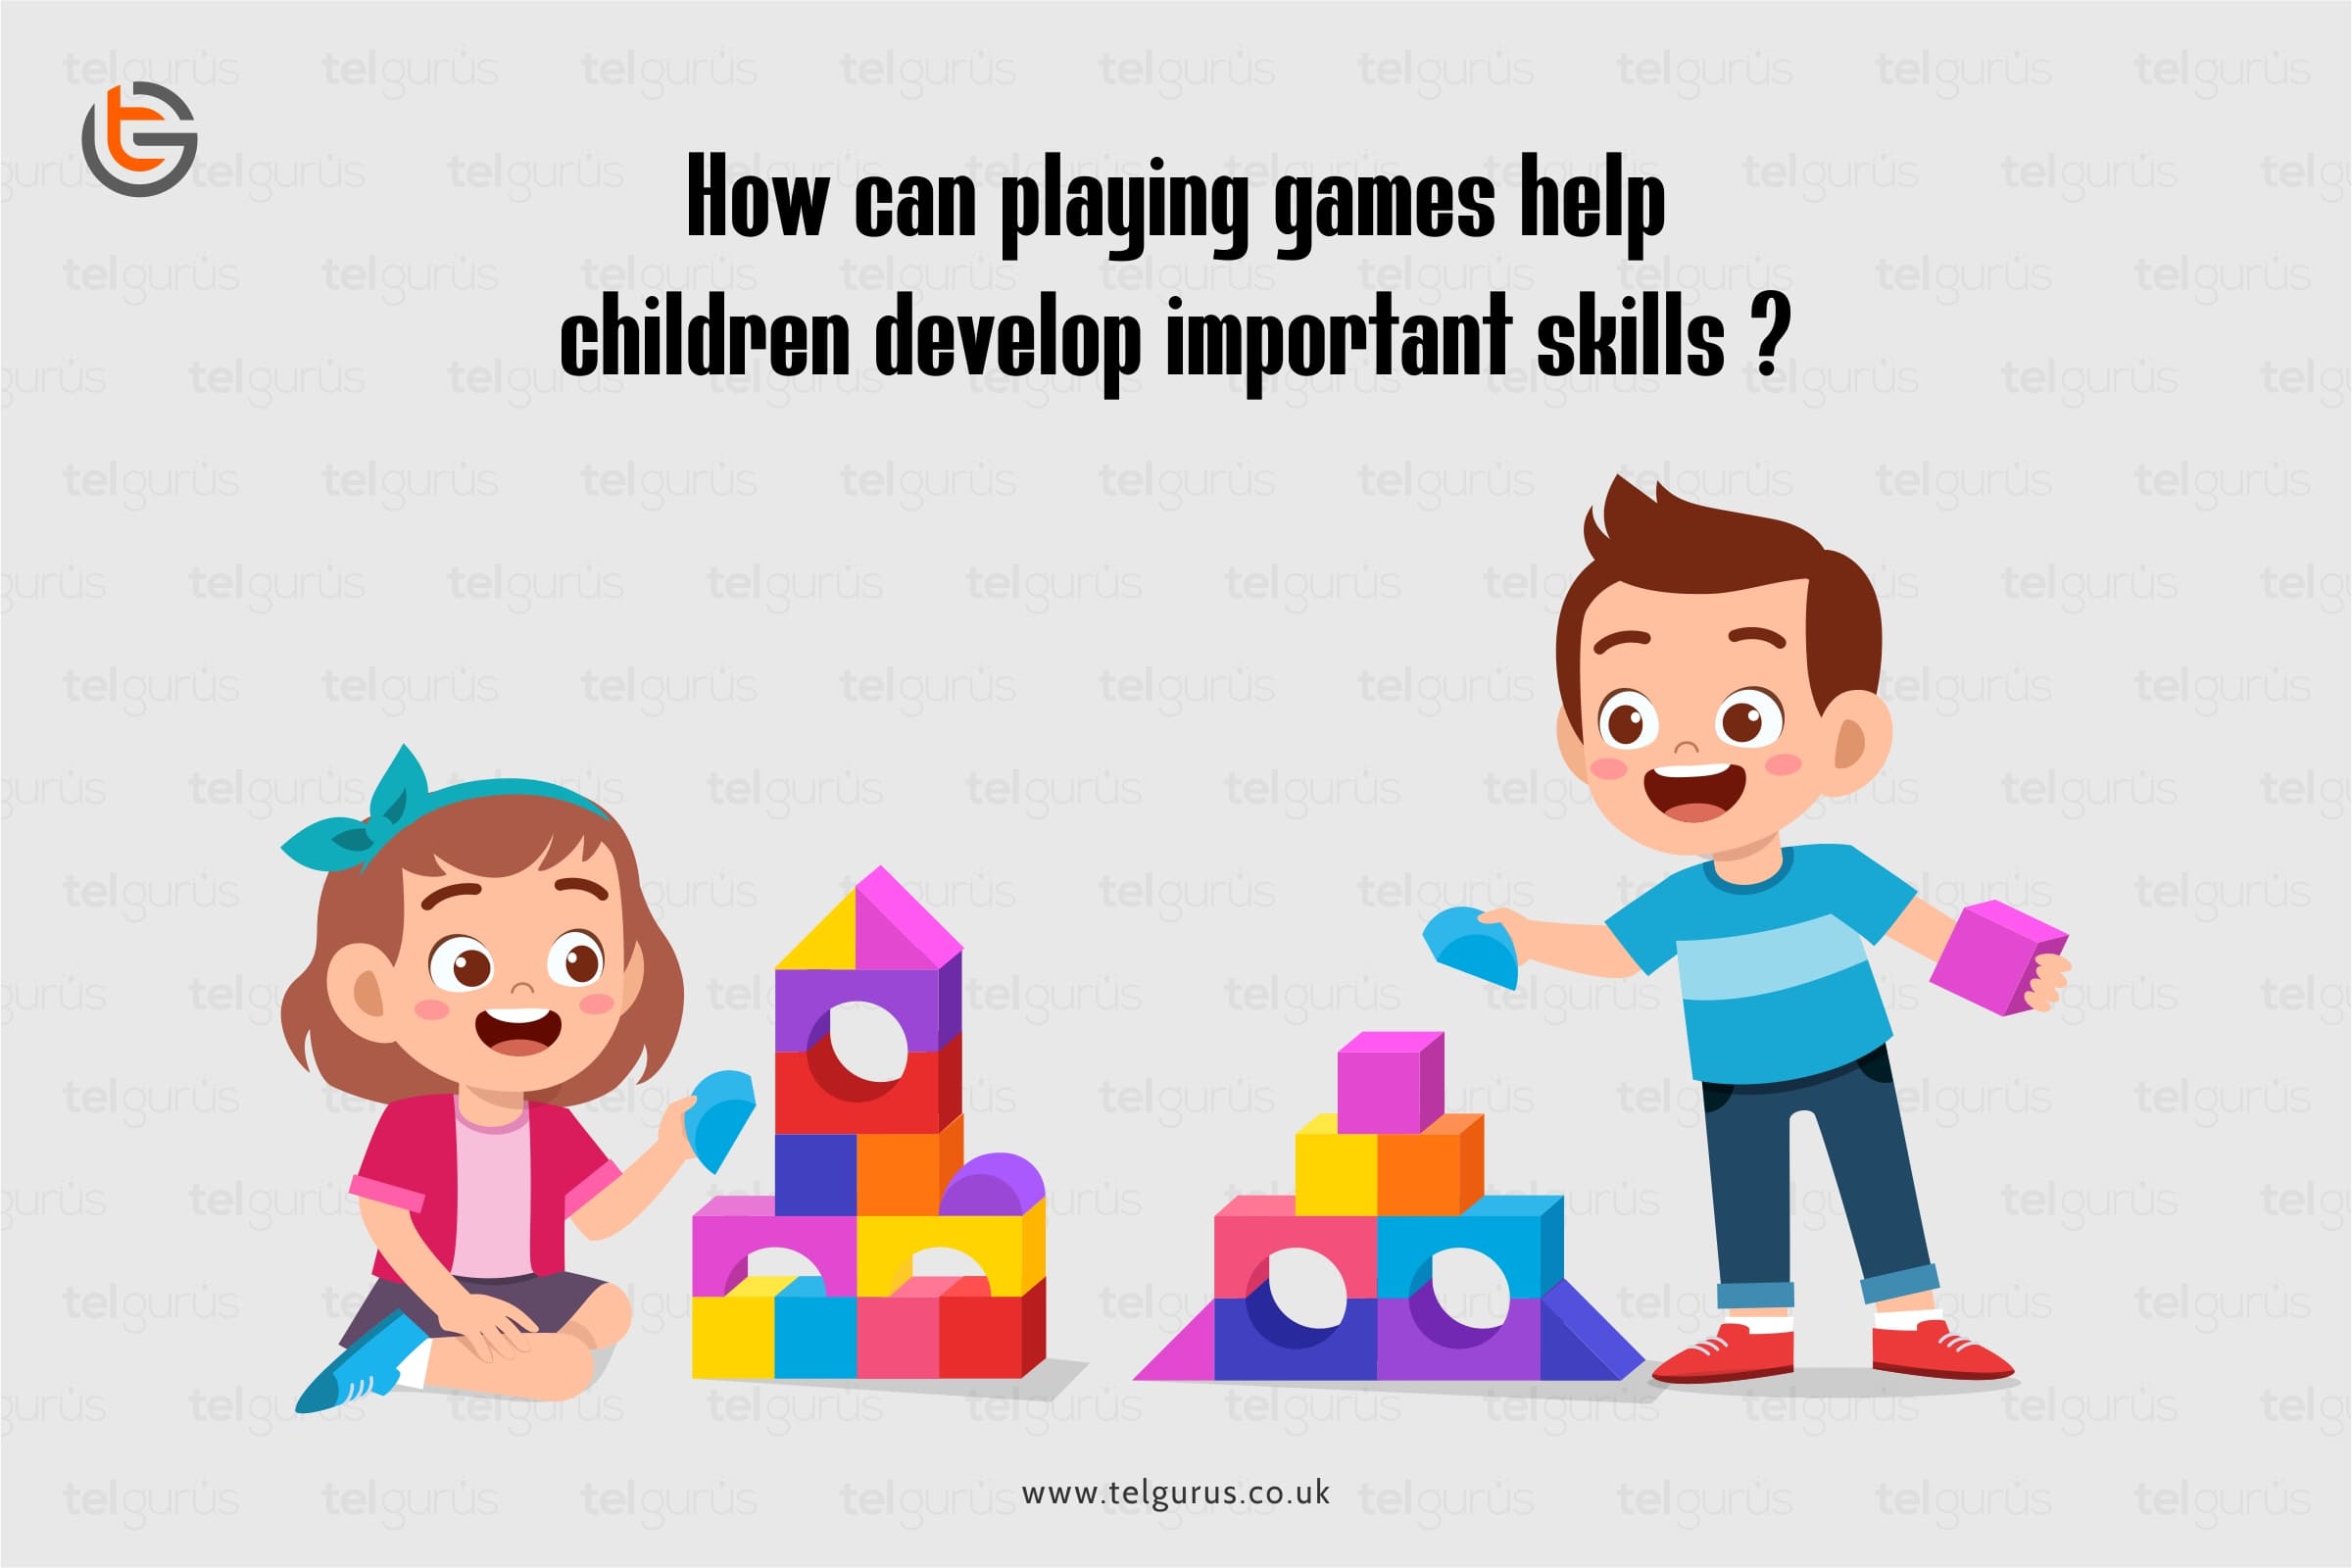 How can playing games help children develop important skills?